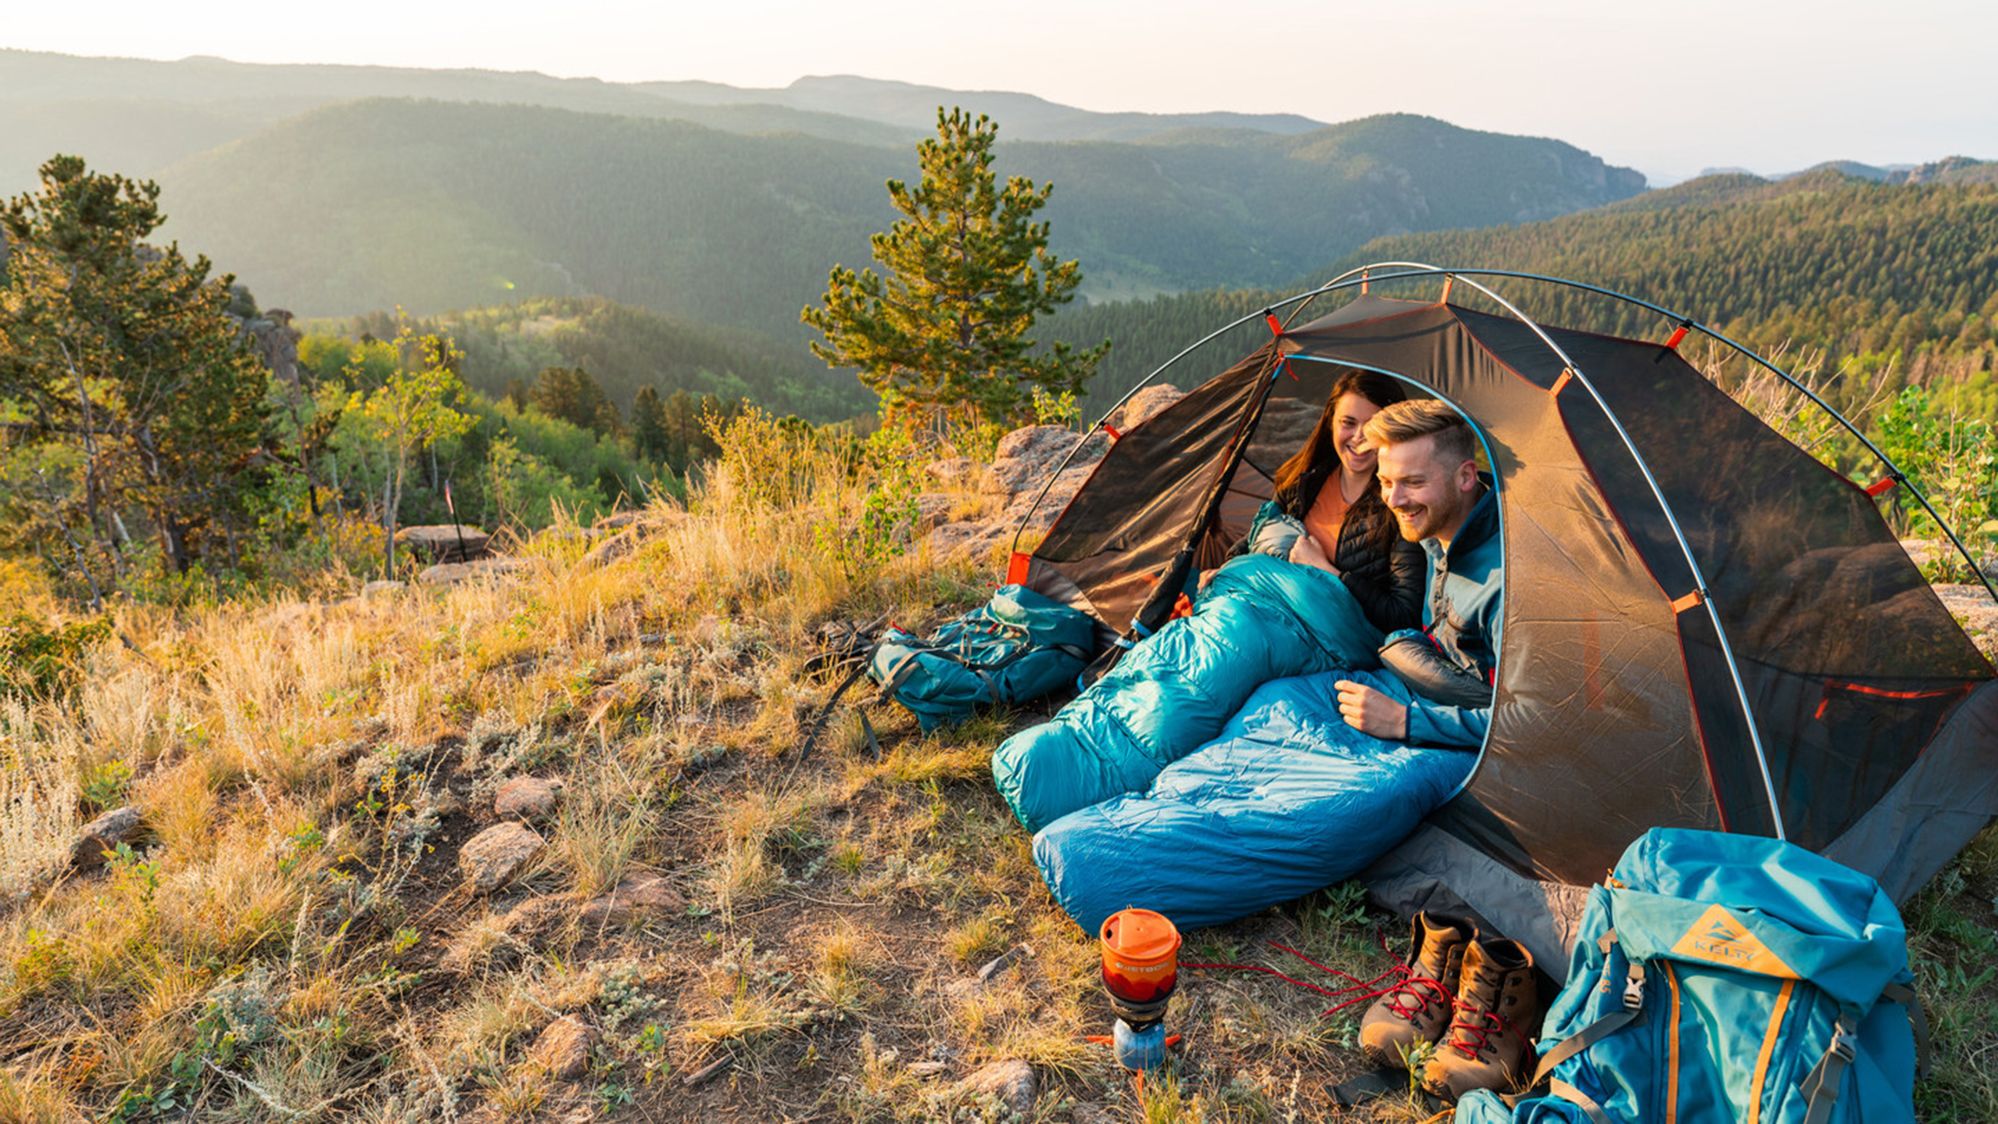 15 Cool Camping and Hiking Gear Items Under $15 Canadian - Explore Magazine